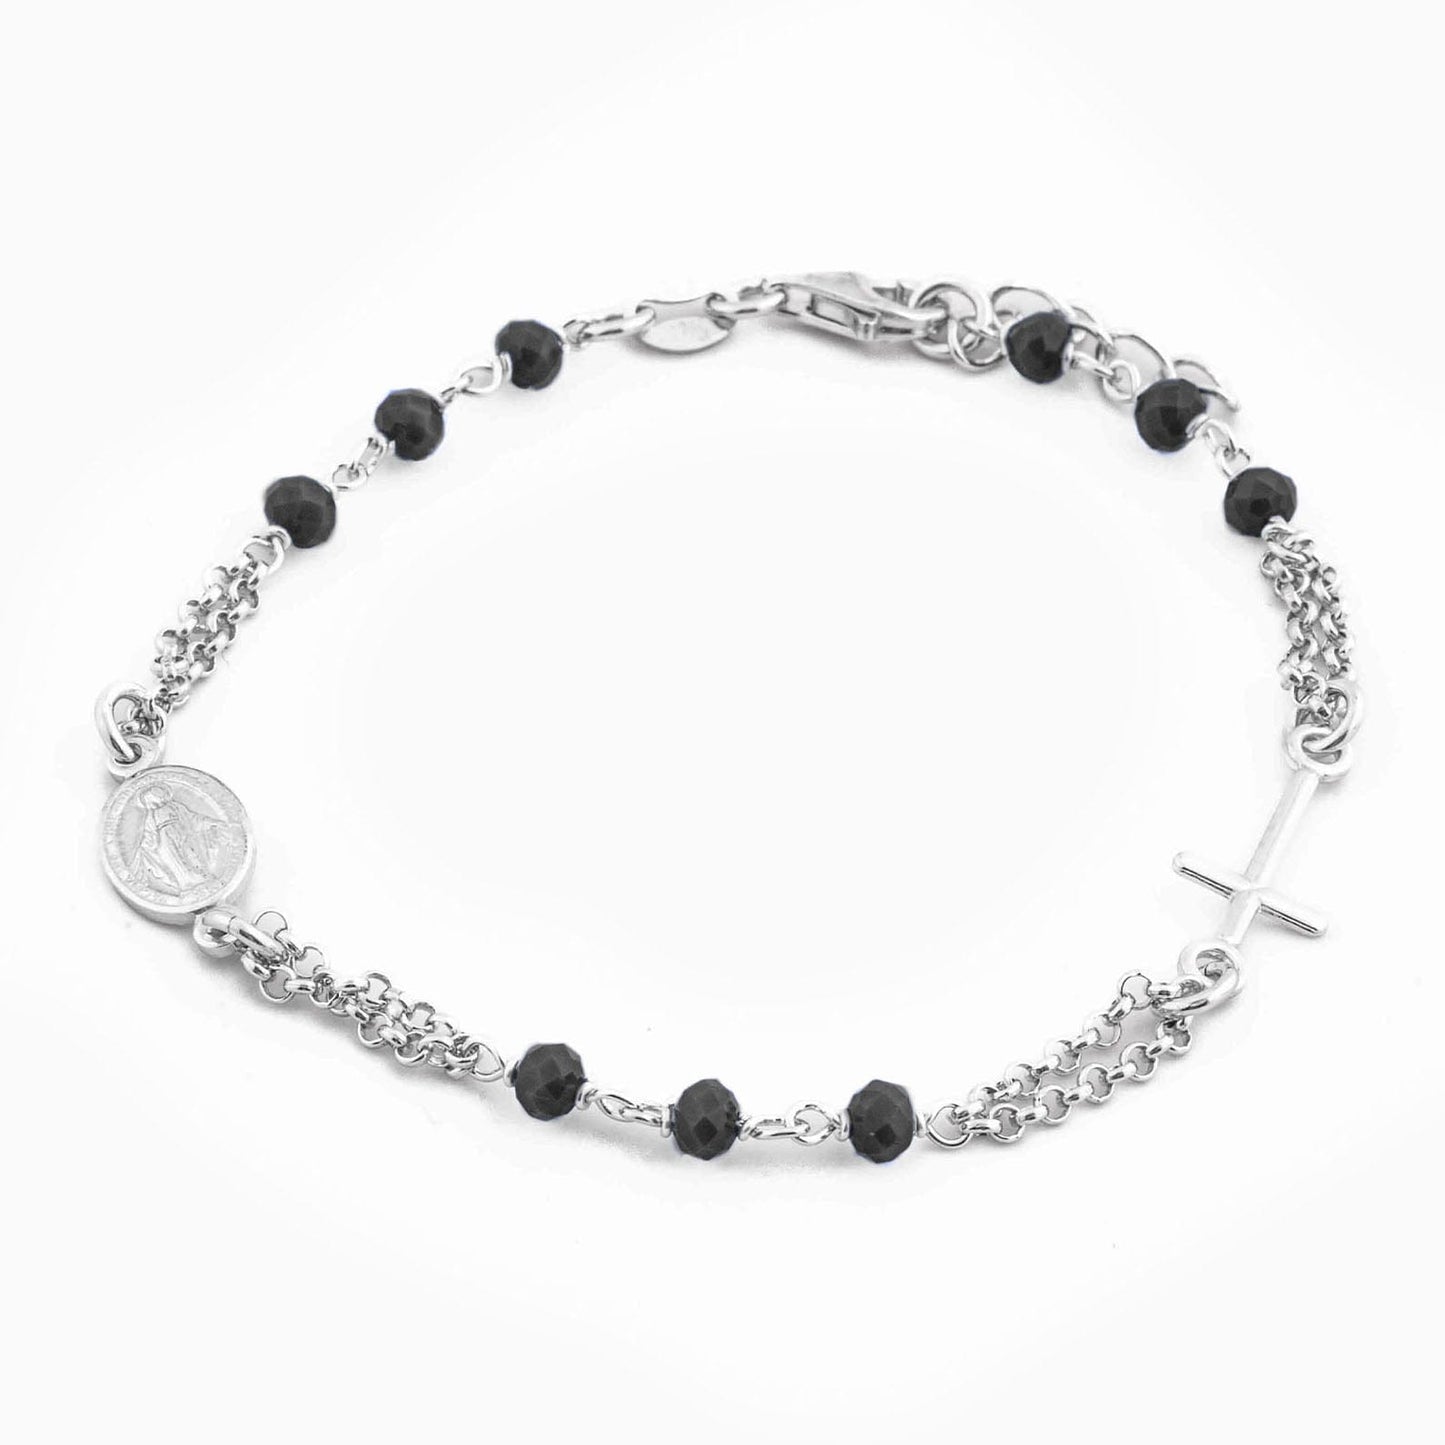 MONDO CATTOLICO Prayer Beads Rhodium / Cm 17.5 (6.9 in) / Cm 3 (1.2 in) STERLING SILVER ROSARY BRACELET DOUBLE CHAIN BLACK FACETED BEADS